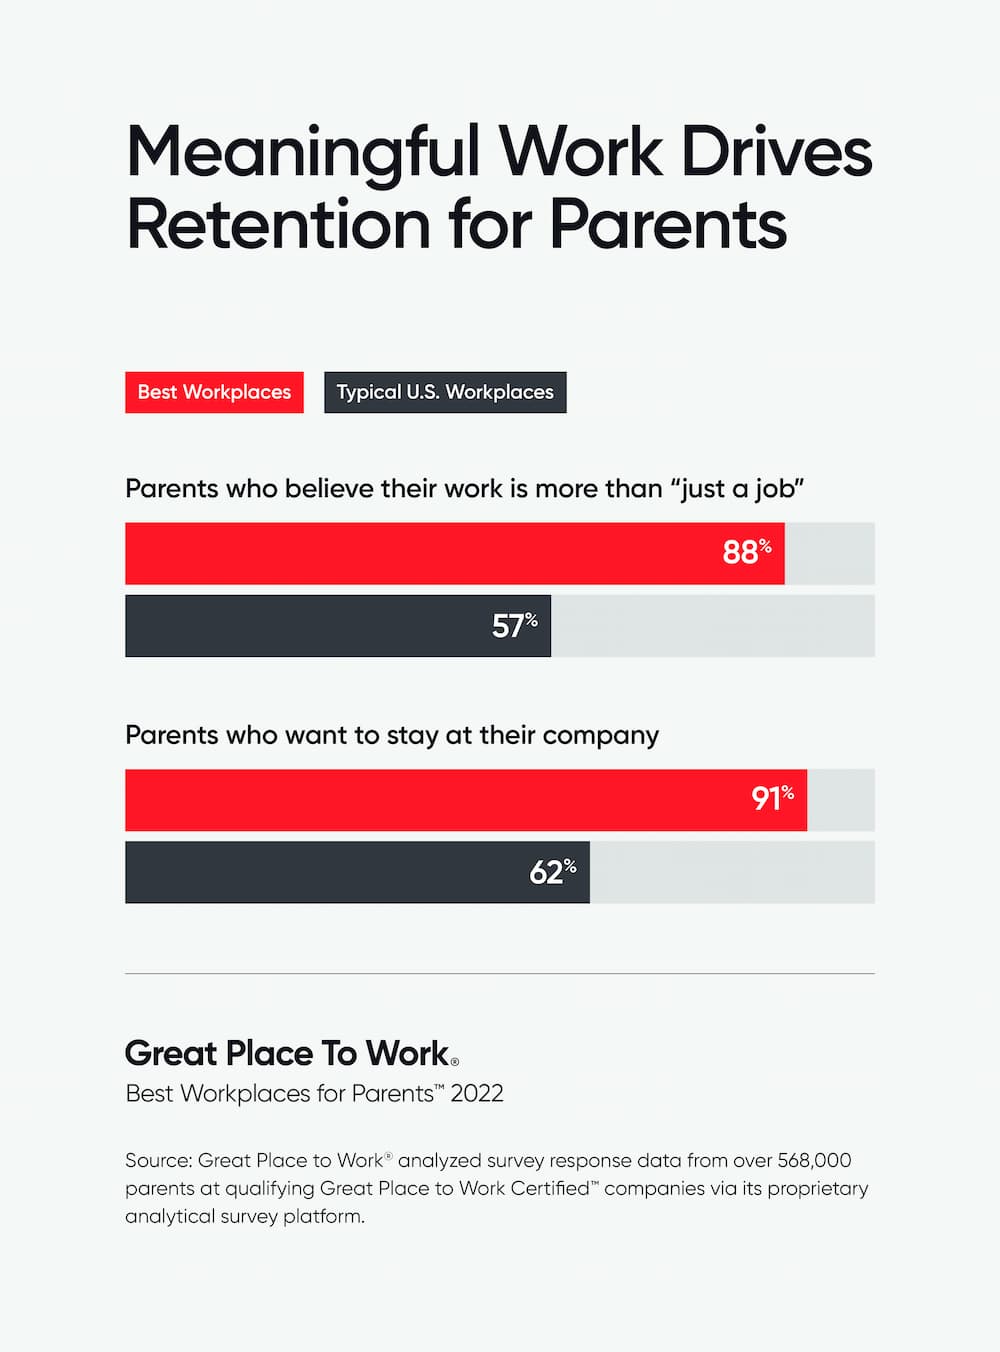 Meaningful work drives retention for parents